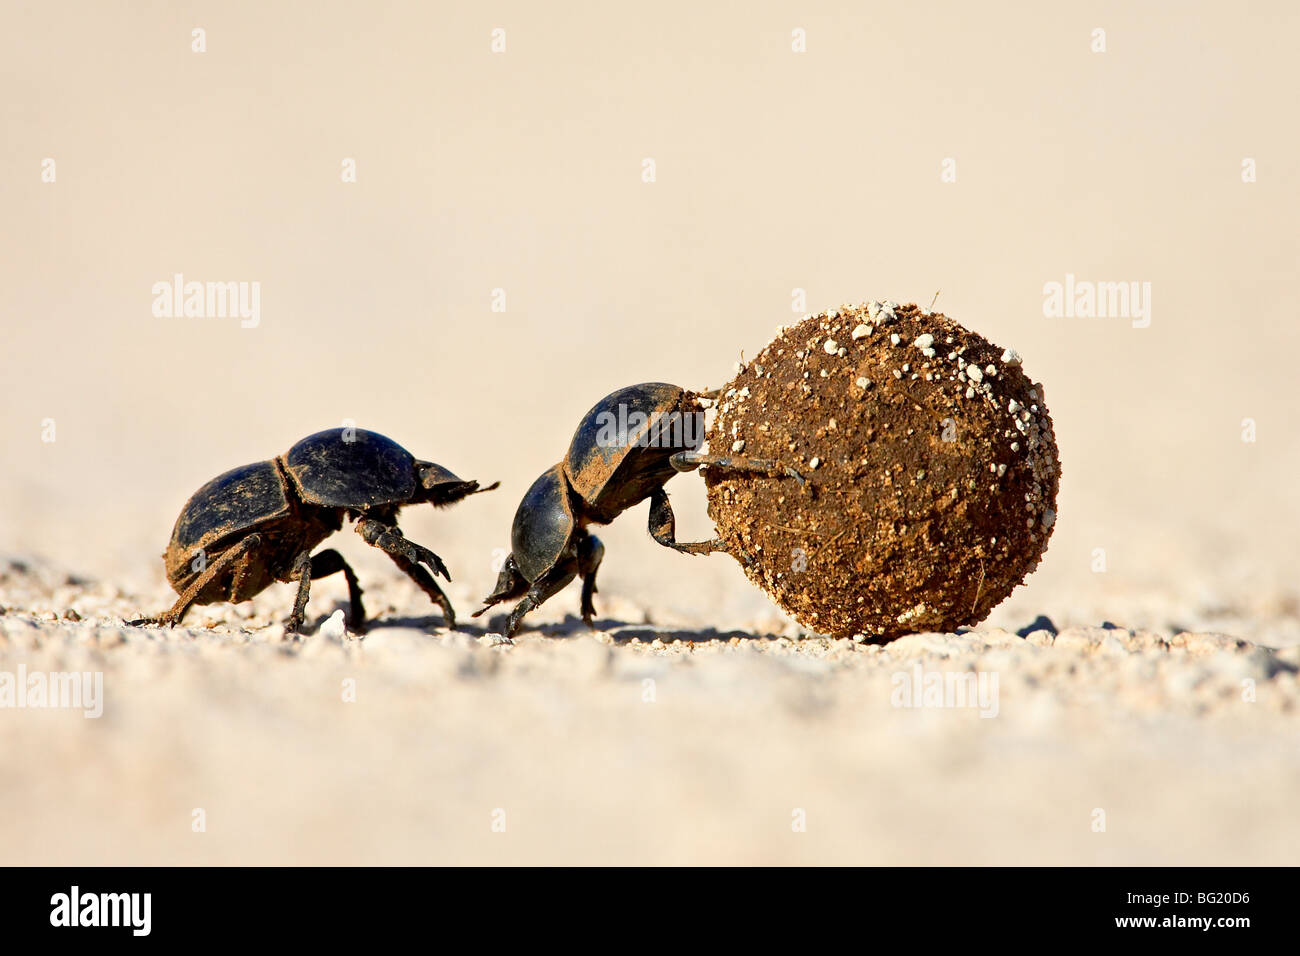 Two dung beetles rolling a dung ball, Addo Elephant National Park, South Africa, Africa Stock Photo